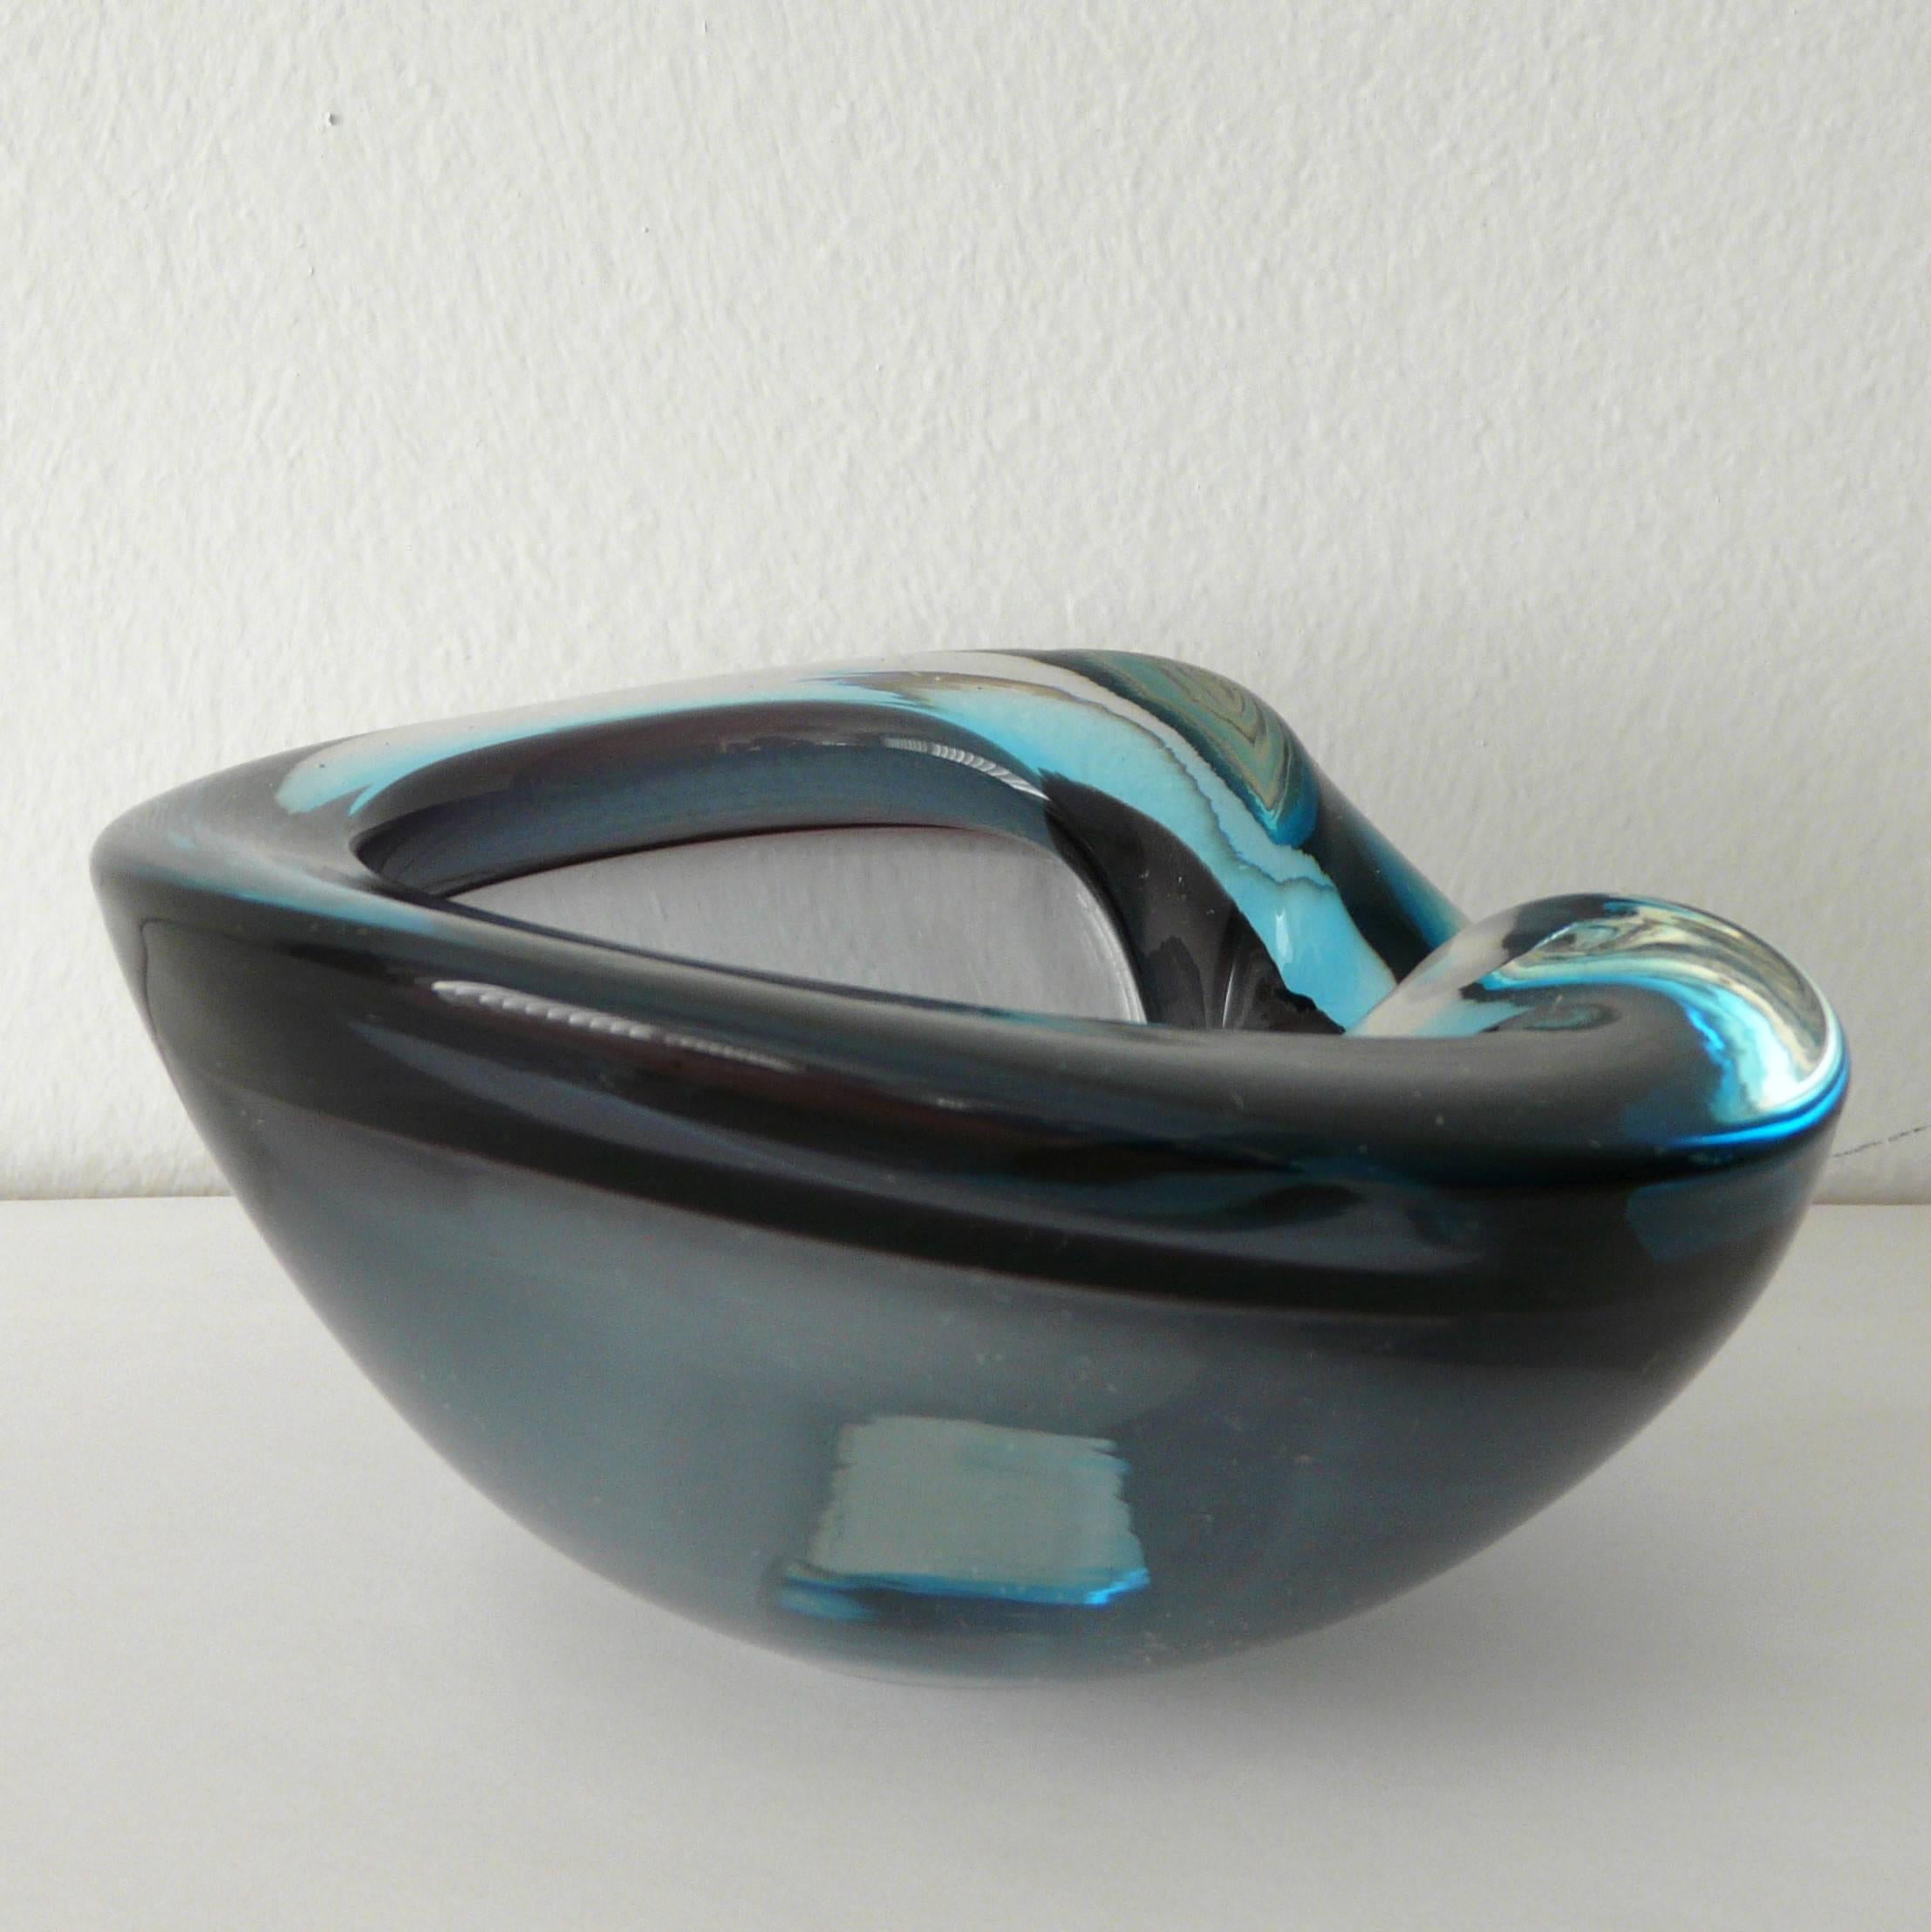 Italian smoky and blue Murano glass ashtray / bowl.
This piece is a great addition to your Christmas and holiday home decor and would be a unique gift!!!